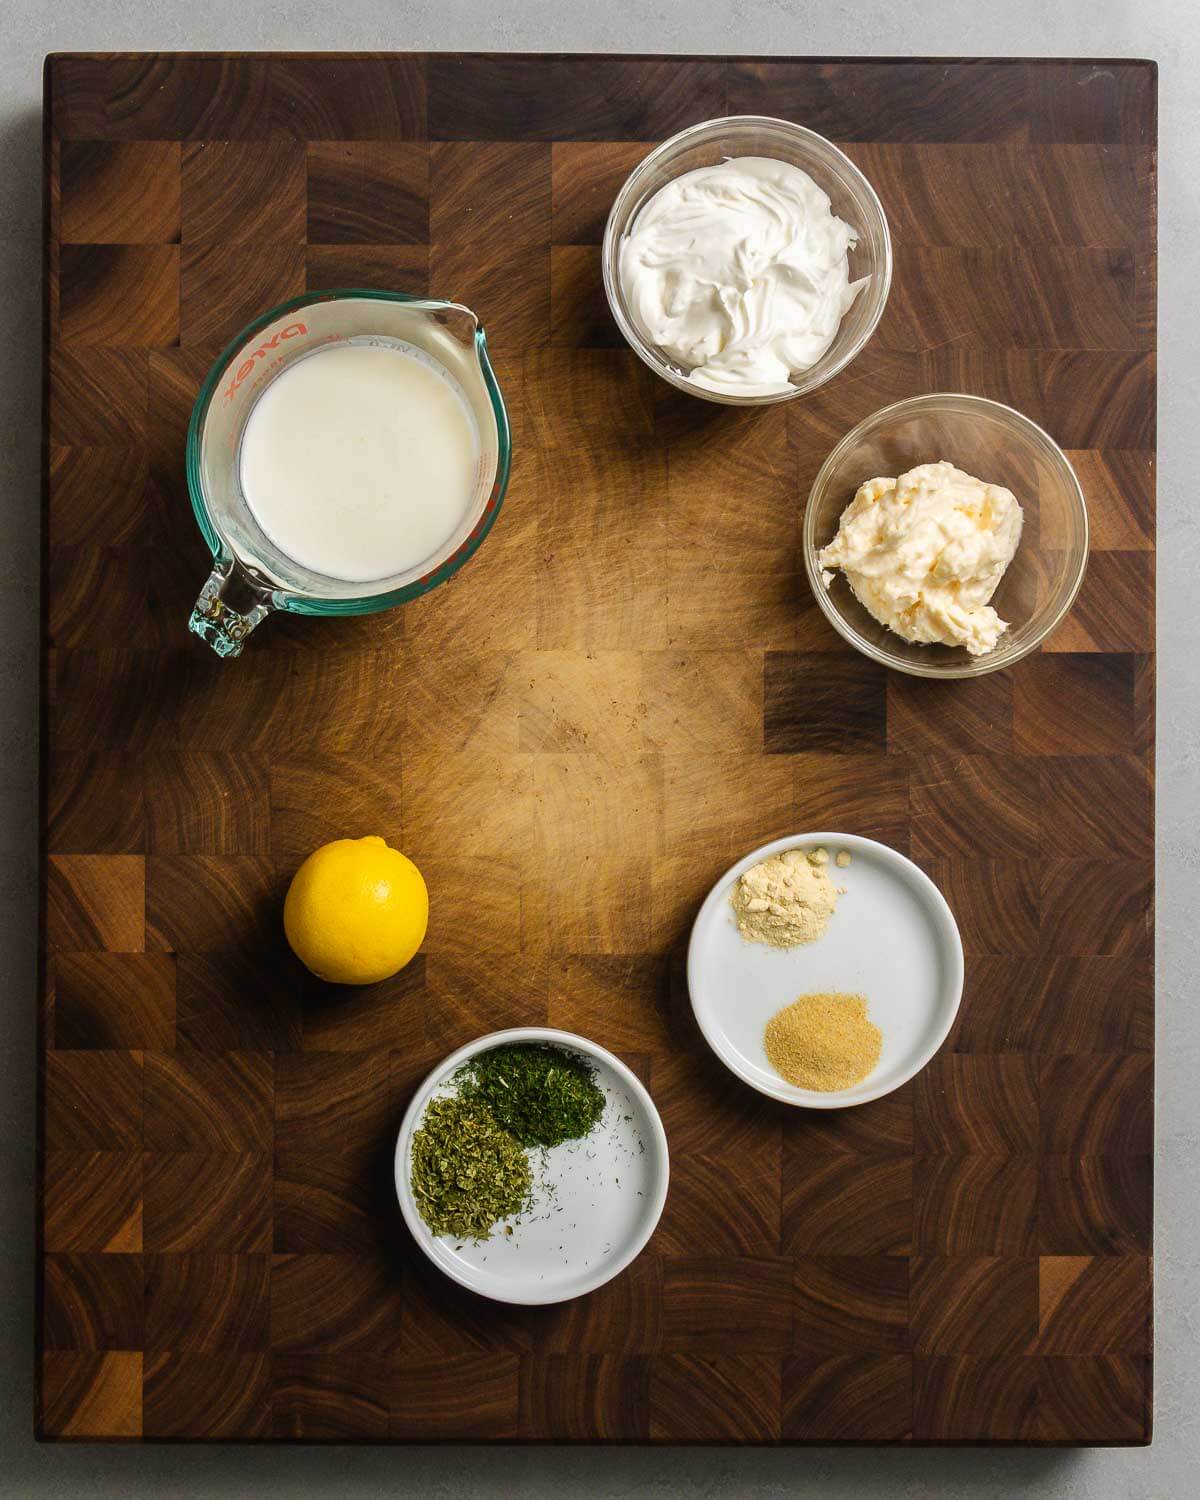 Ingredients shown: buttermilk, mayonnaise, sour cream, lemon, granulated garlic, onion powder, dried parsley, and dried dill.